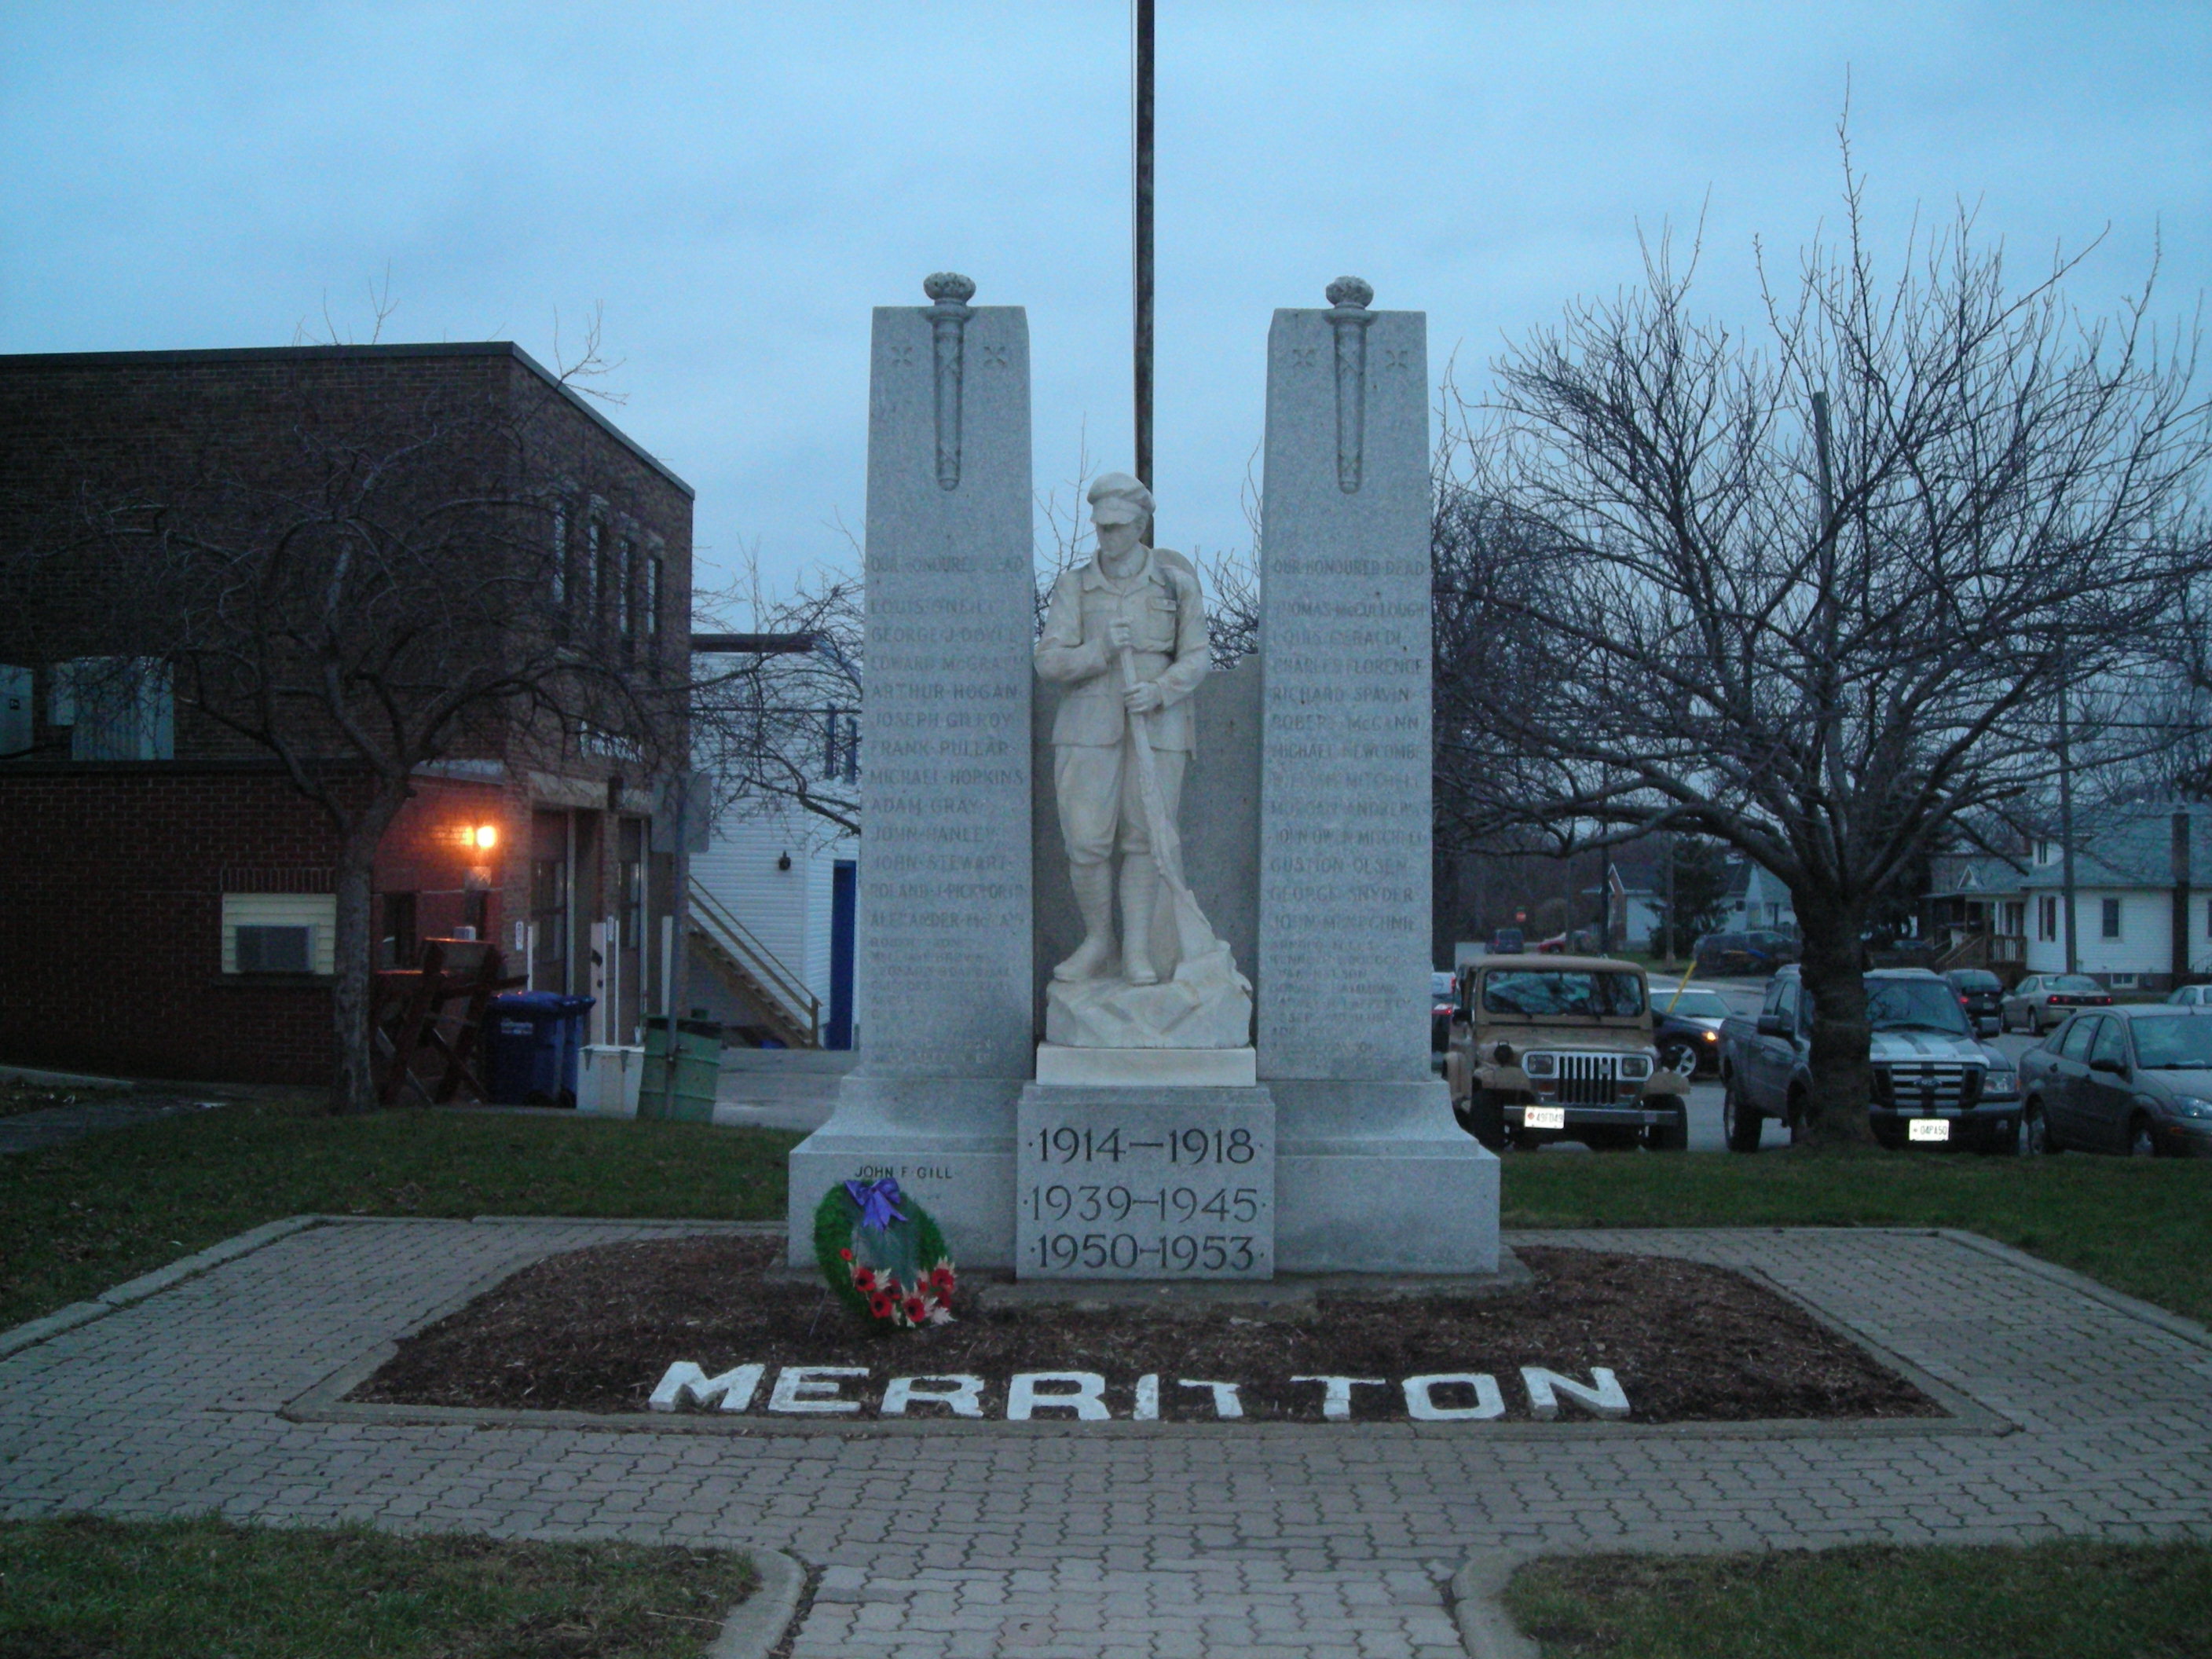 A picture of the Merritton Cenotaph from a distance in 2008.